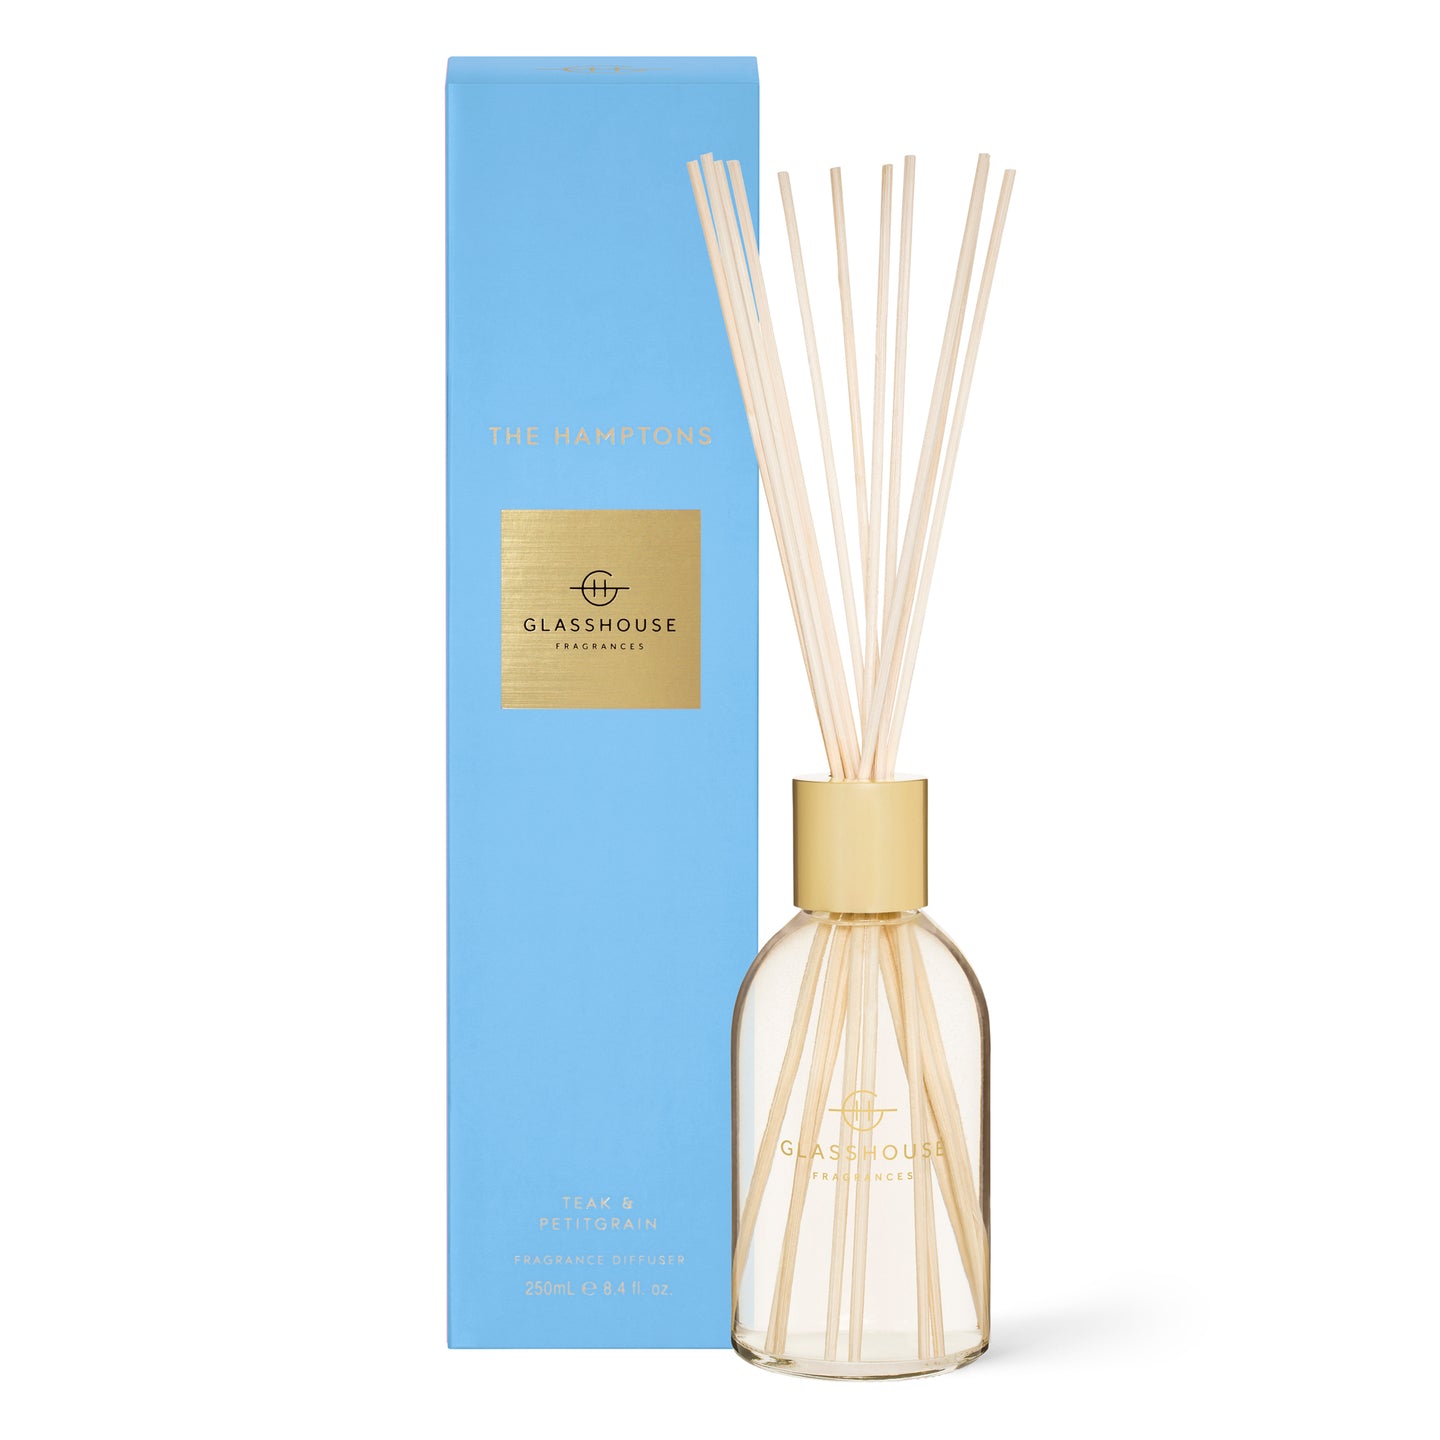 The Hamptons by Glasshouse. Fragrance-Diffuser the Hamptons